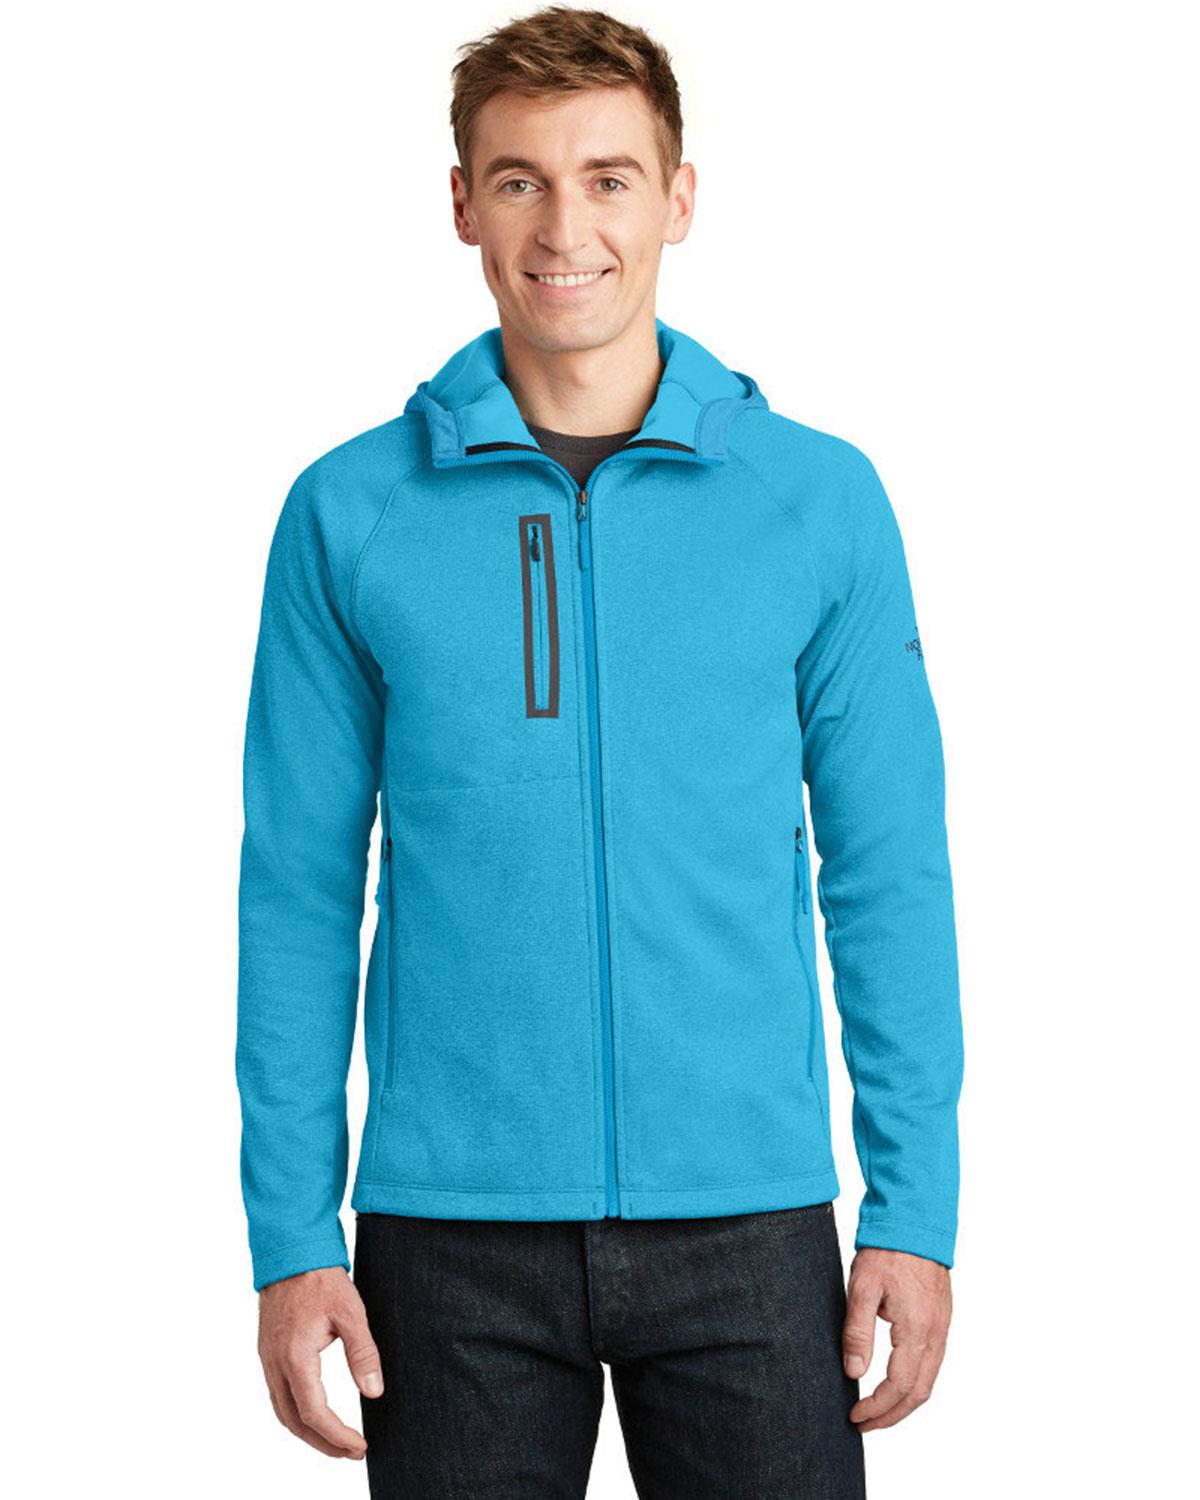 The North Face NF0A3LHH Mens Jacket